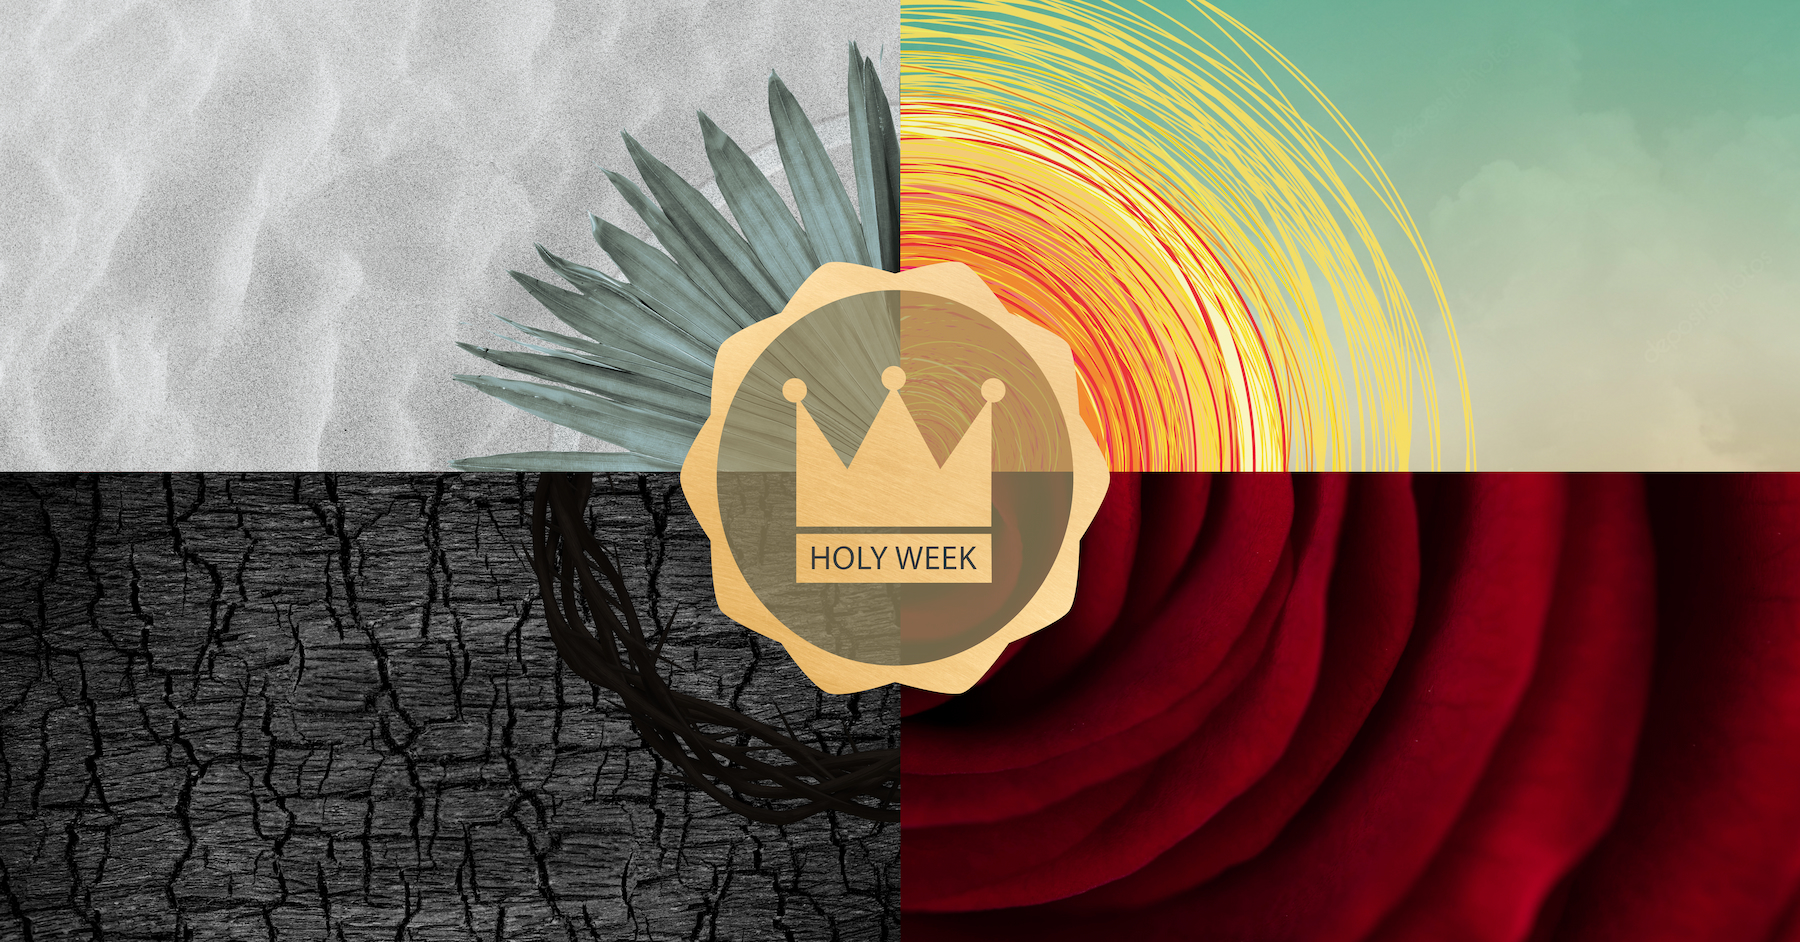 Resources for Monday - Wednesday of Holy Week